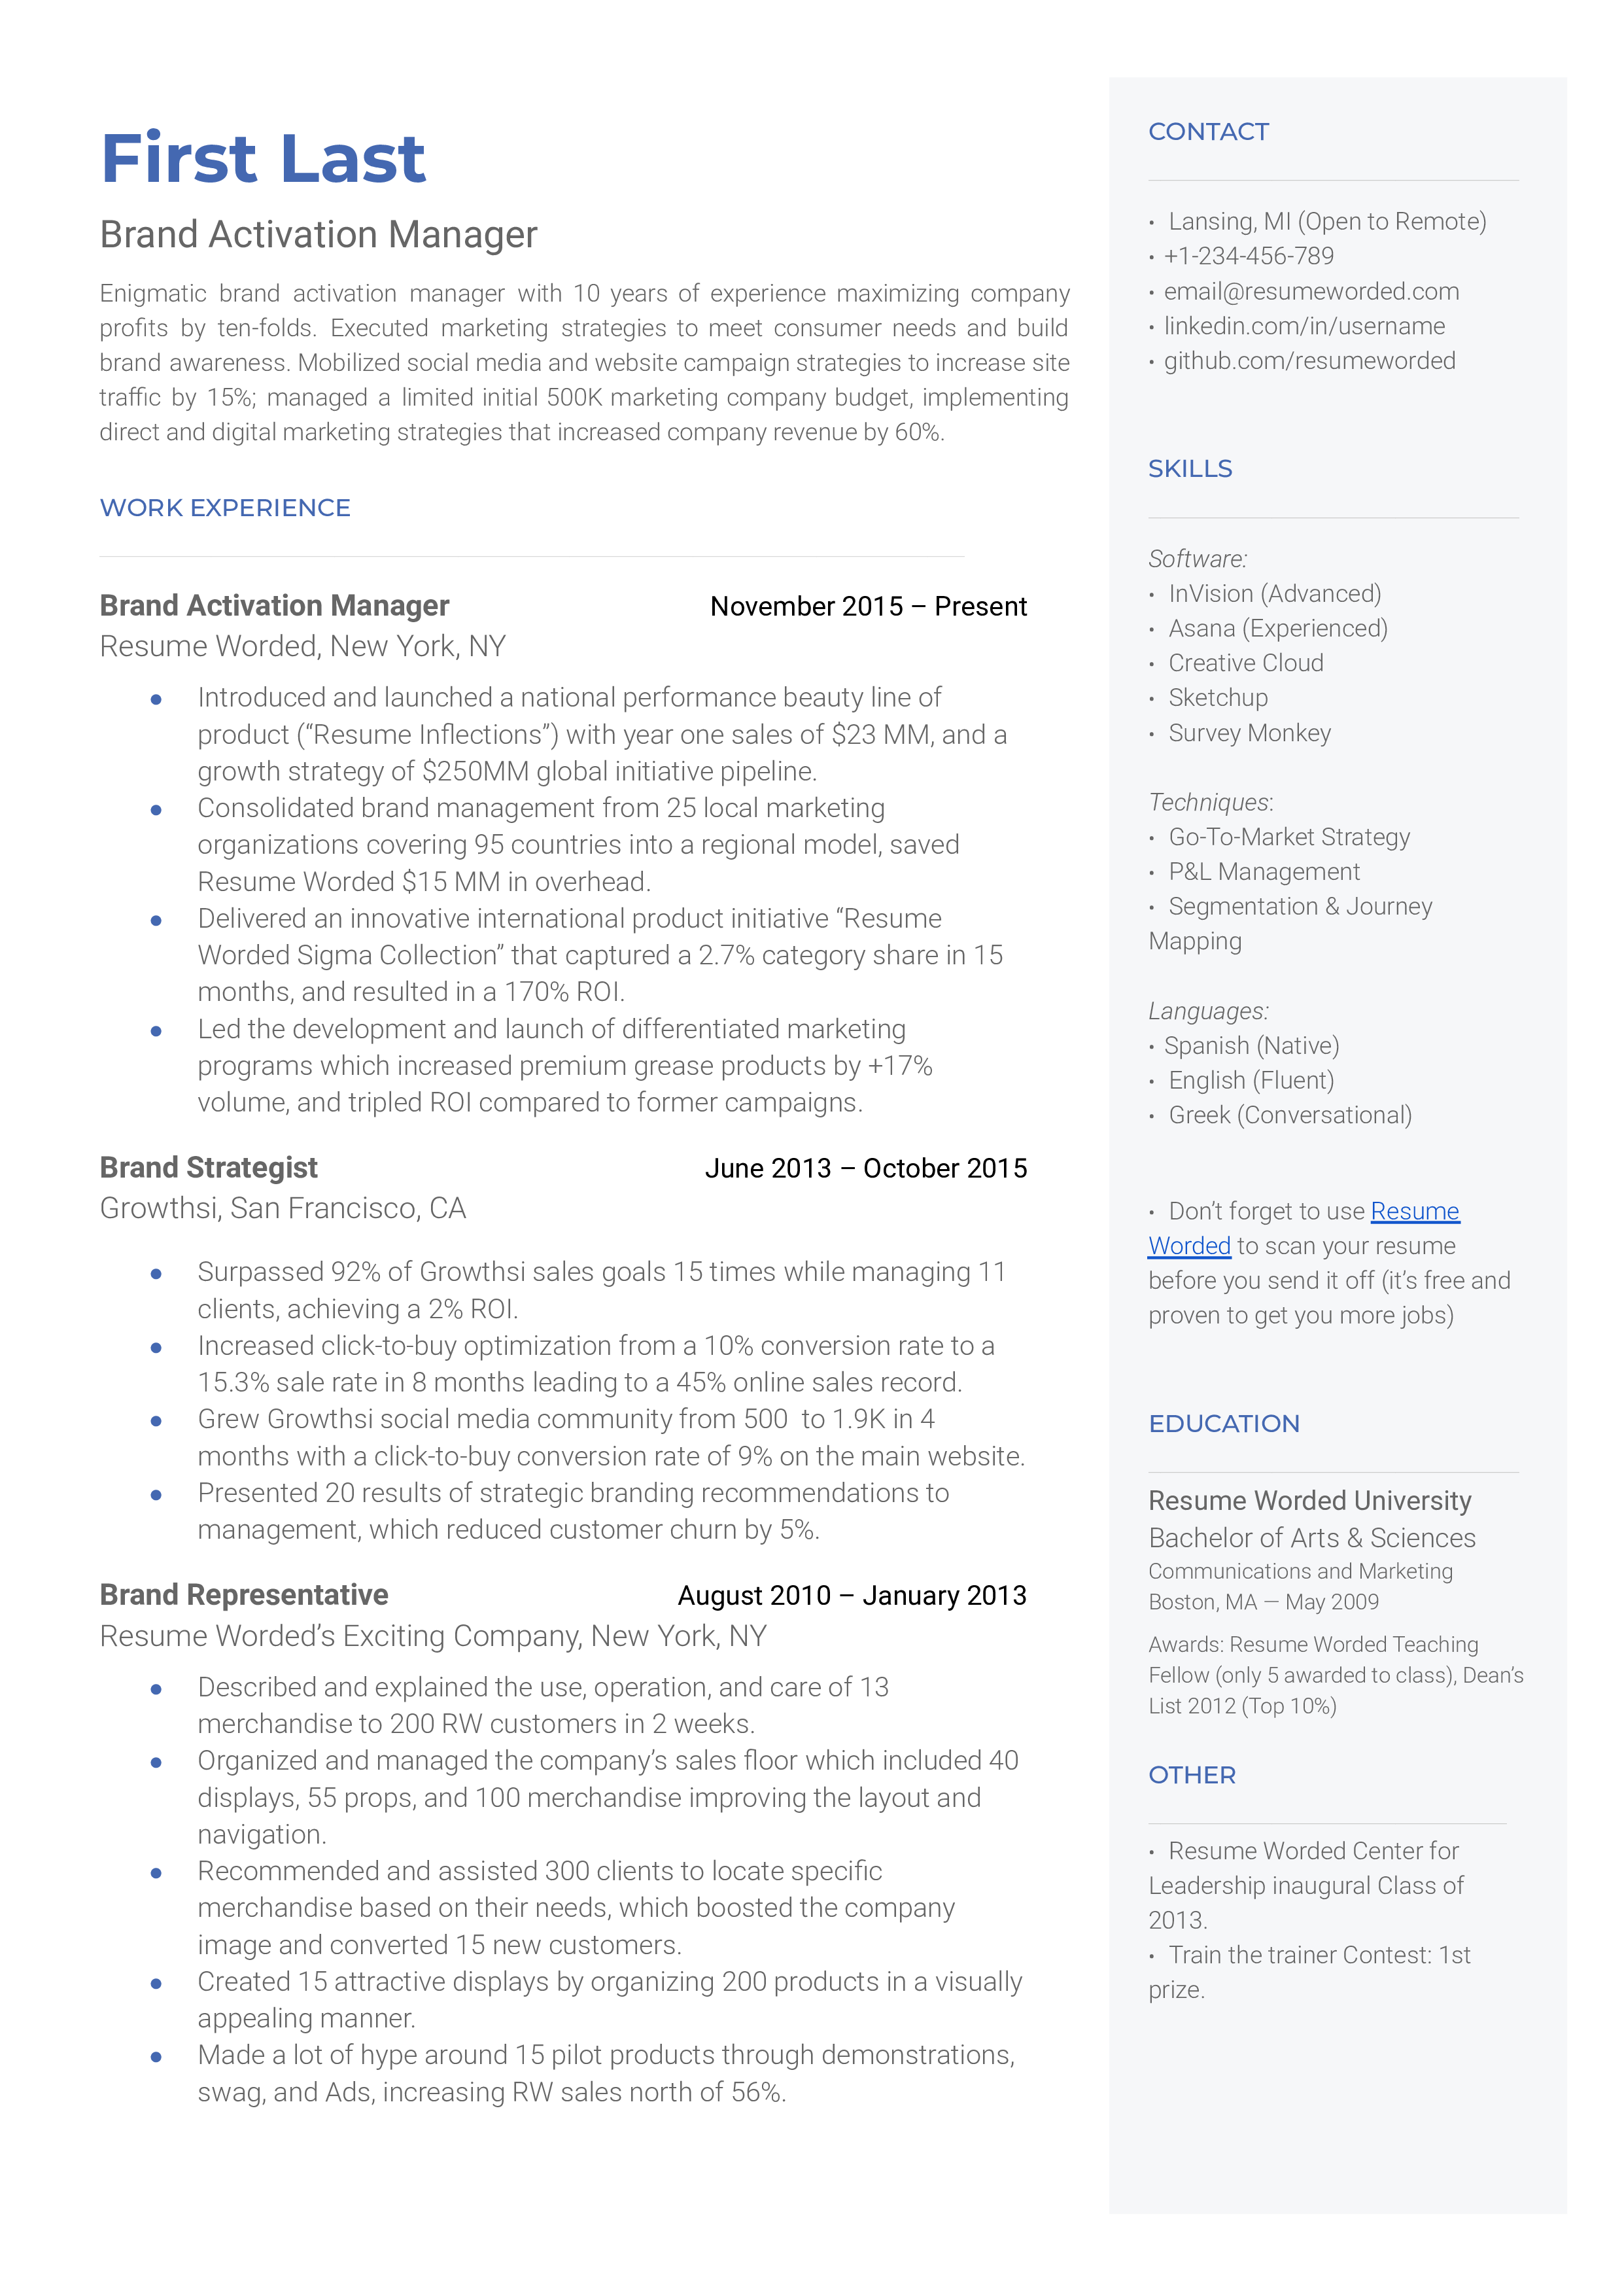 Brand Activation Manager Resume Template + Example